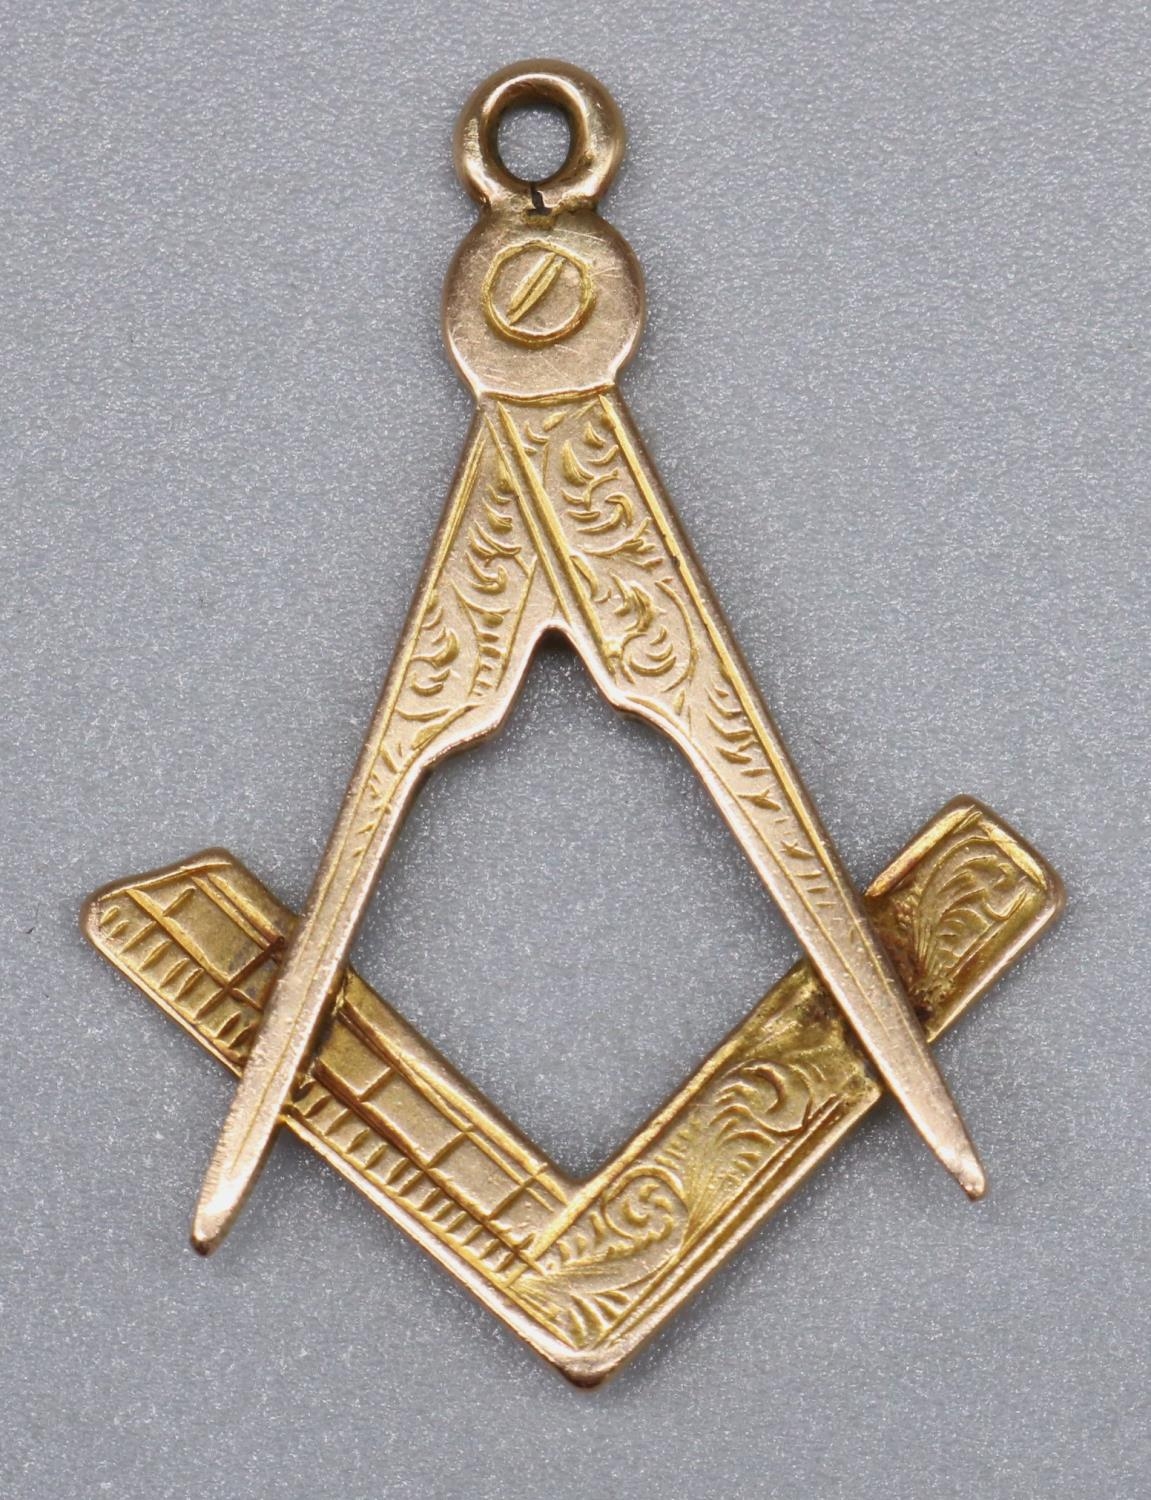 15ct gold hallmarked Masonic Square and Compass pendant with engraved detail, L3.5cm 4.3g